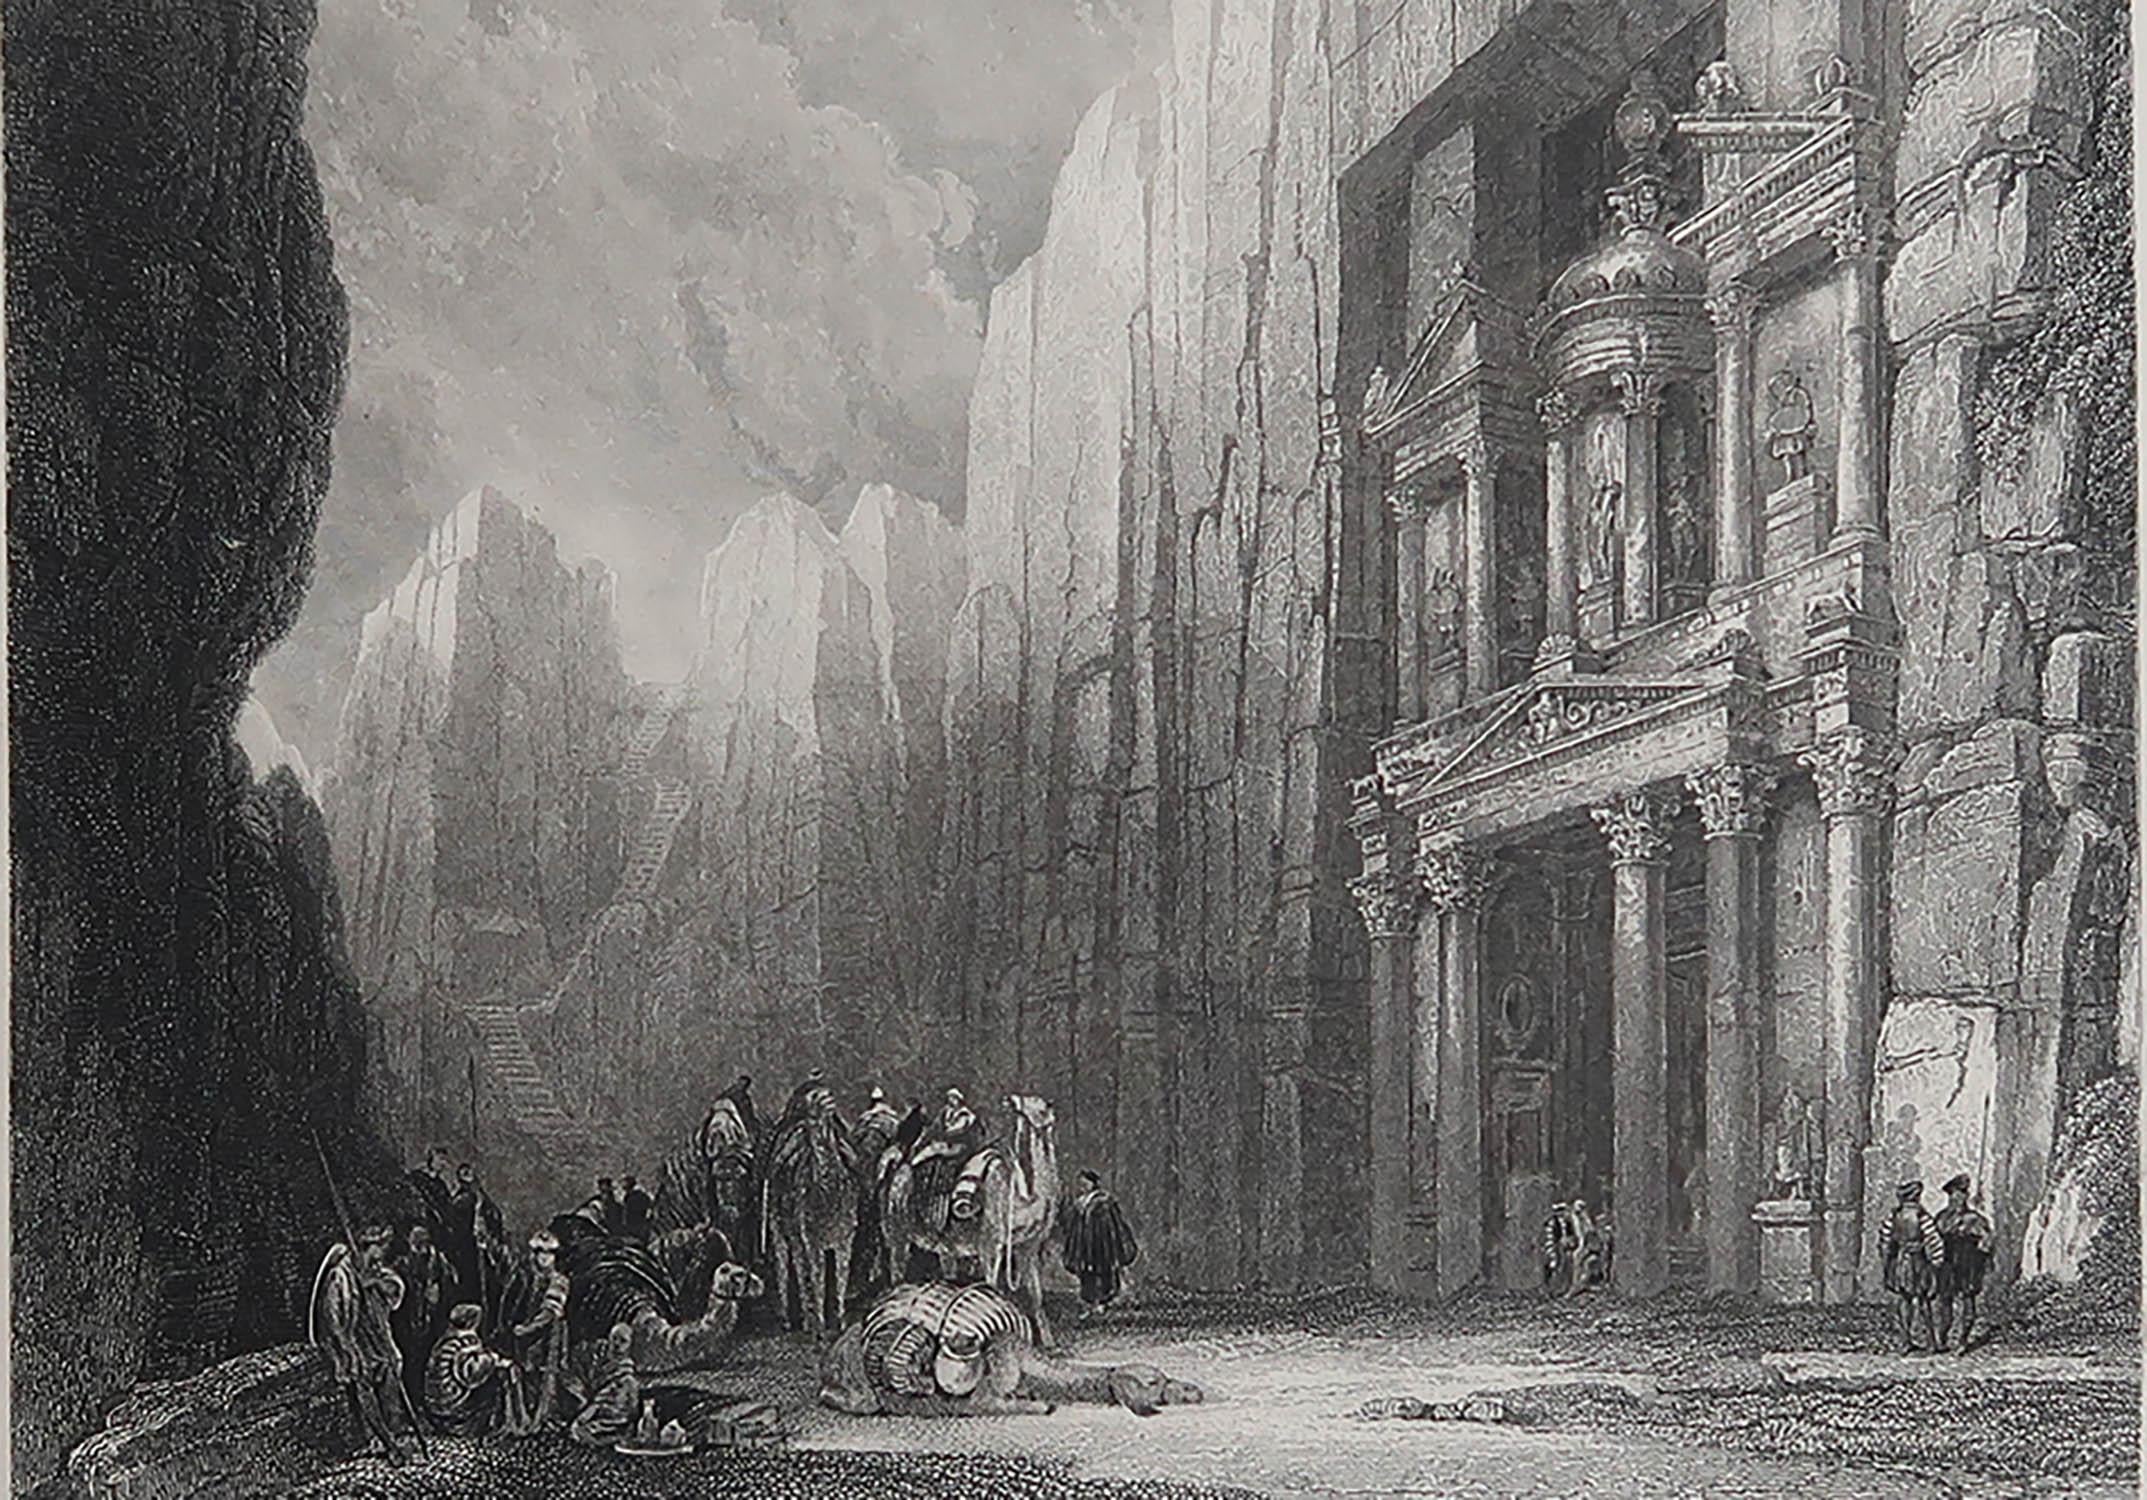 Wonderful image of Petra, Jordan

Fine steel engraving after David Roberts

Published circa 1850

The measurement given is the paper size

Unframed.

